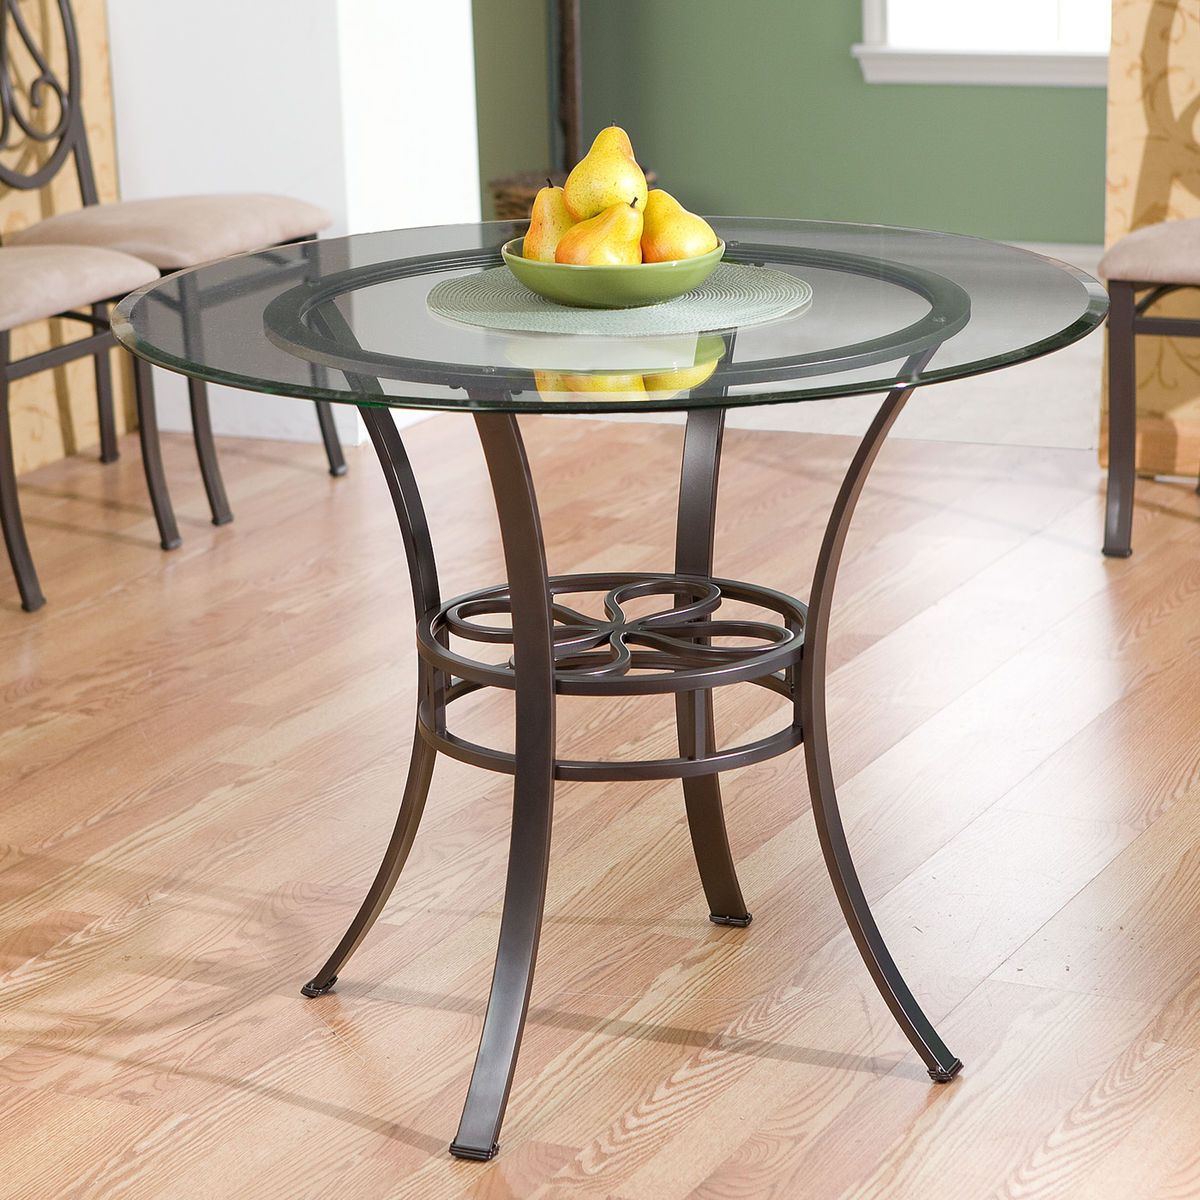 LUCIANNA Dining Table Round w/ Glass Top Metal Base Chairs Available